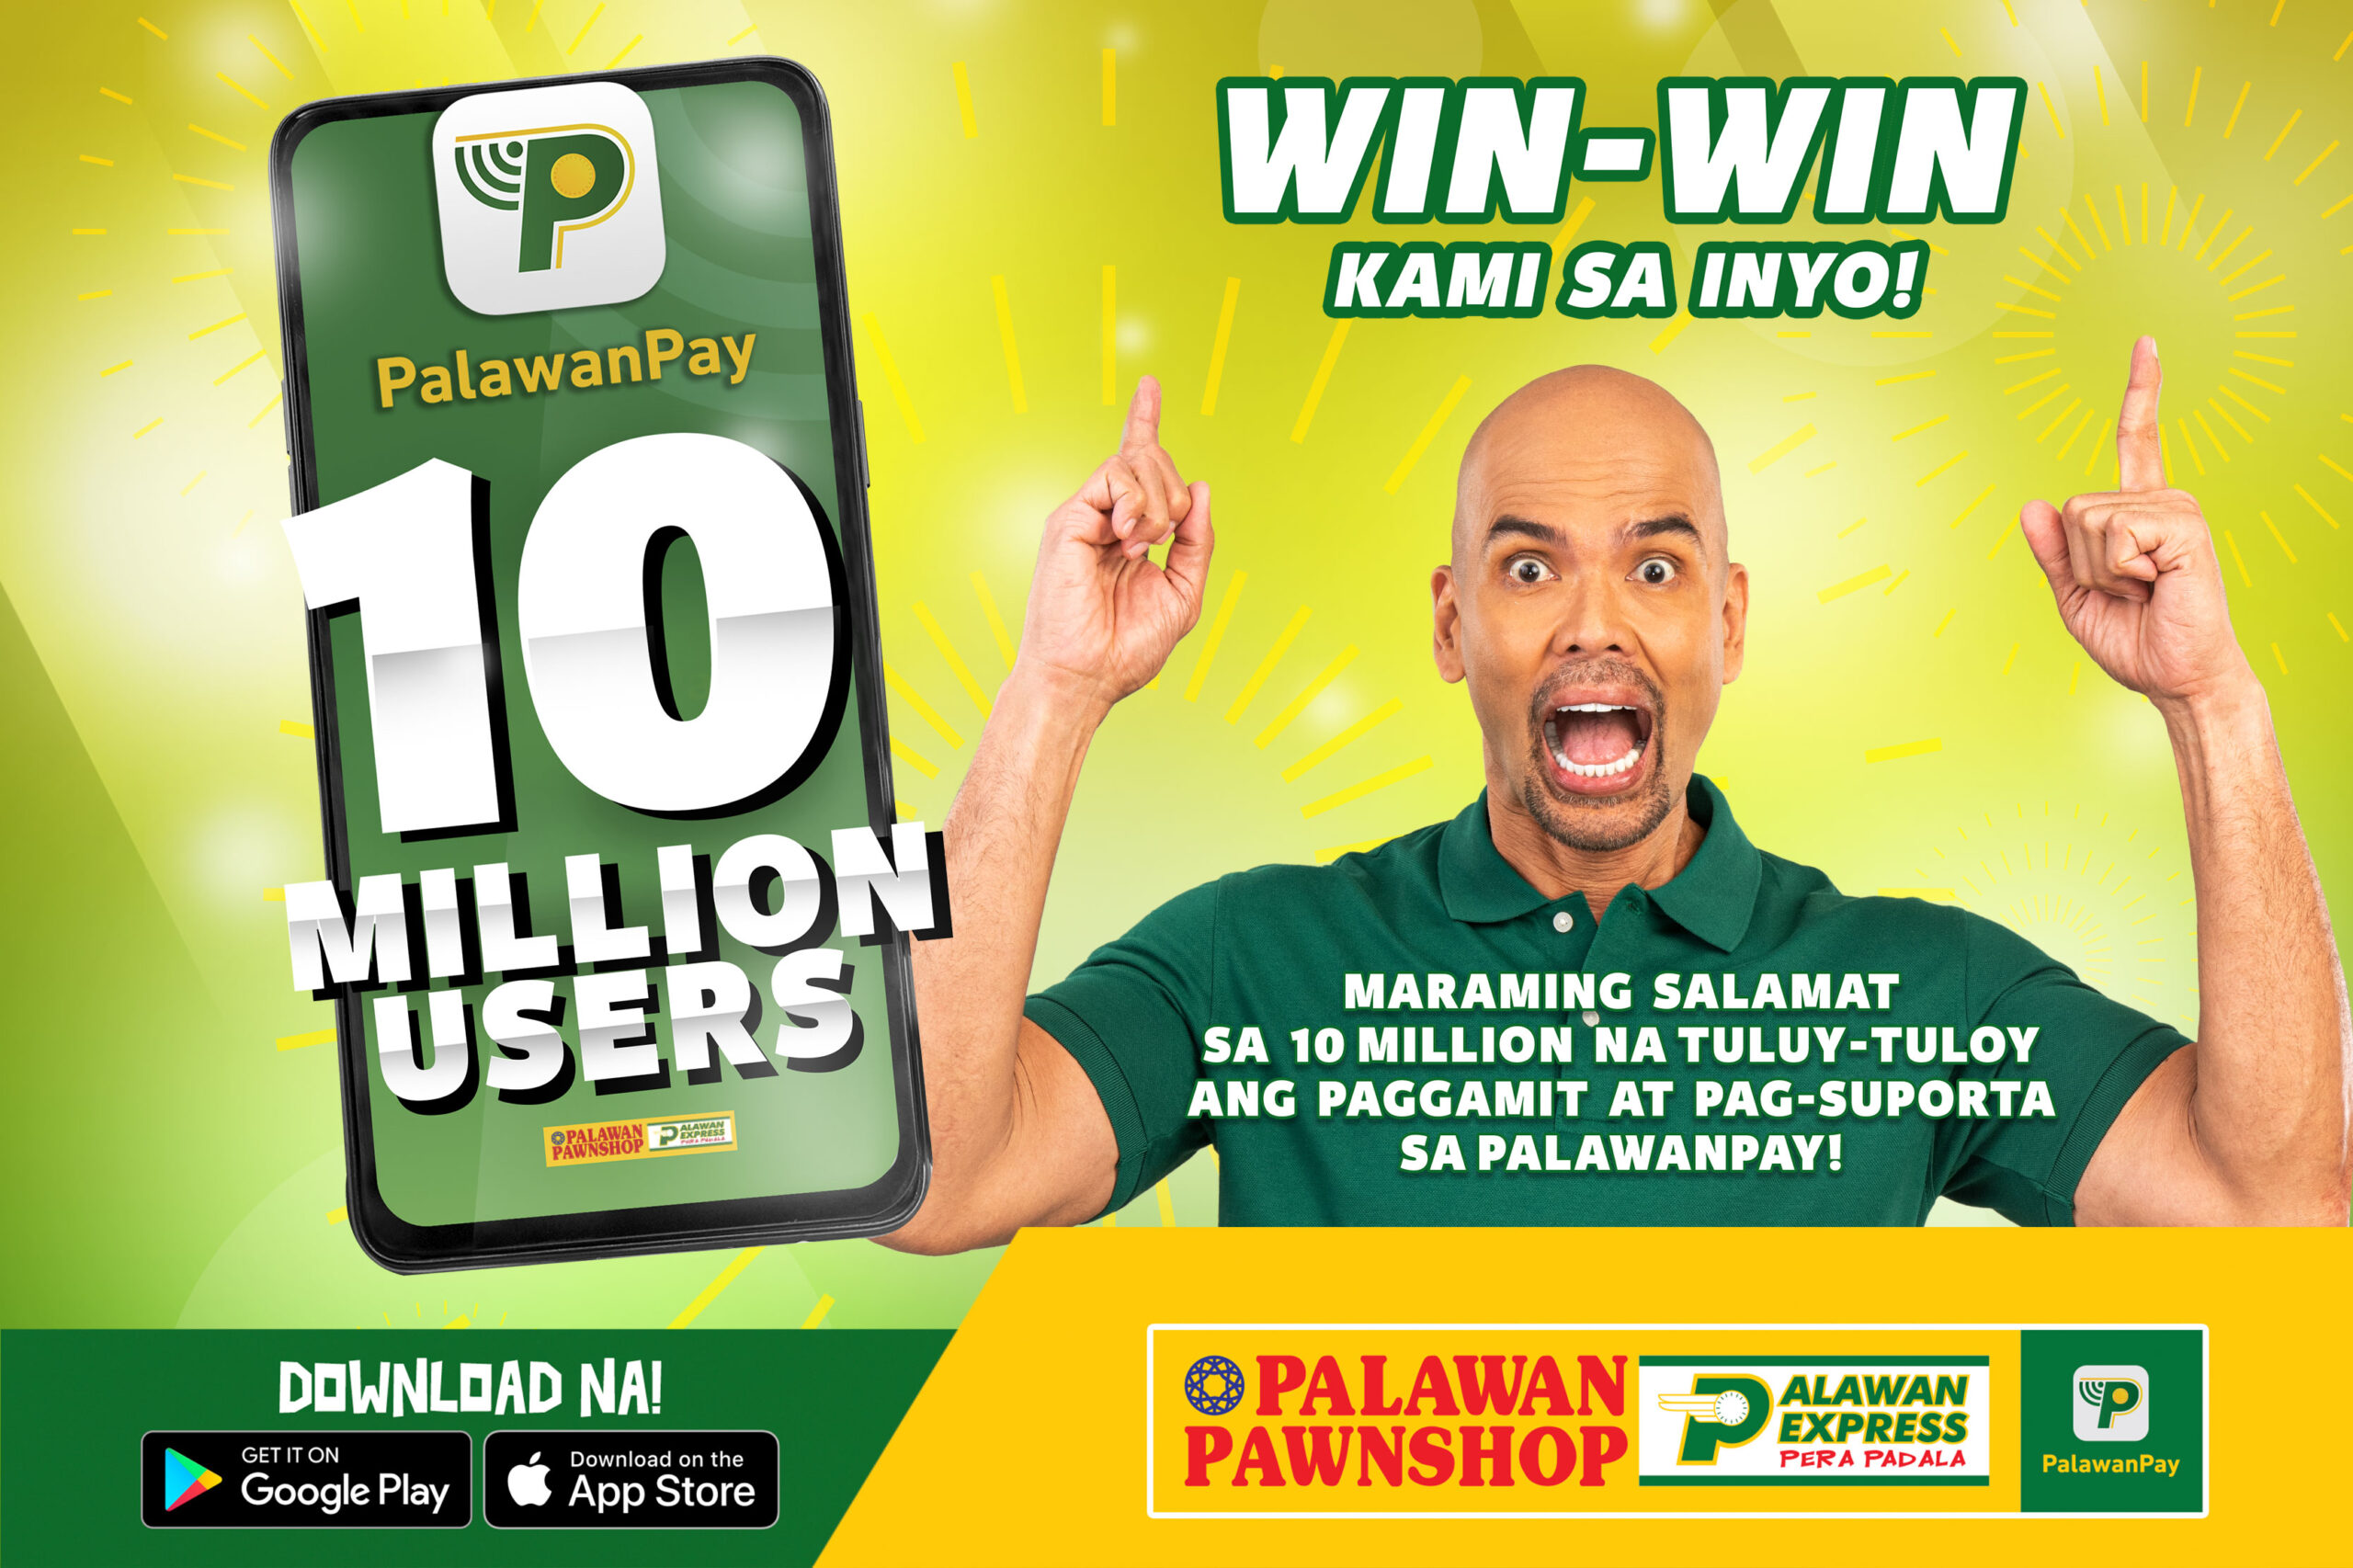 Unstoppable Force: PalawanPay user count skyrockets to 10M in just 1 year